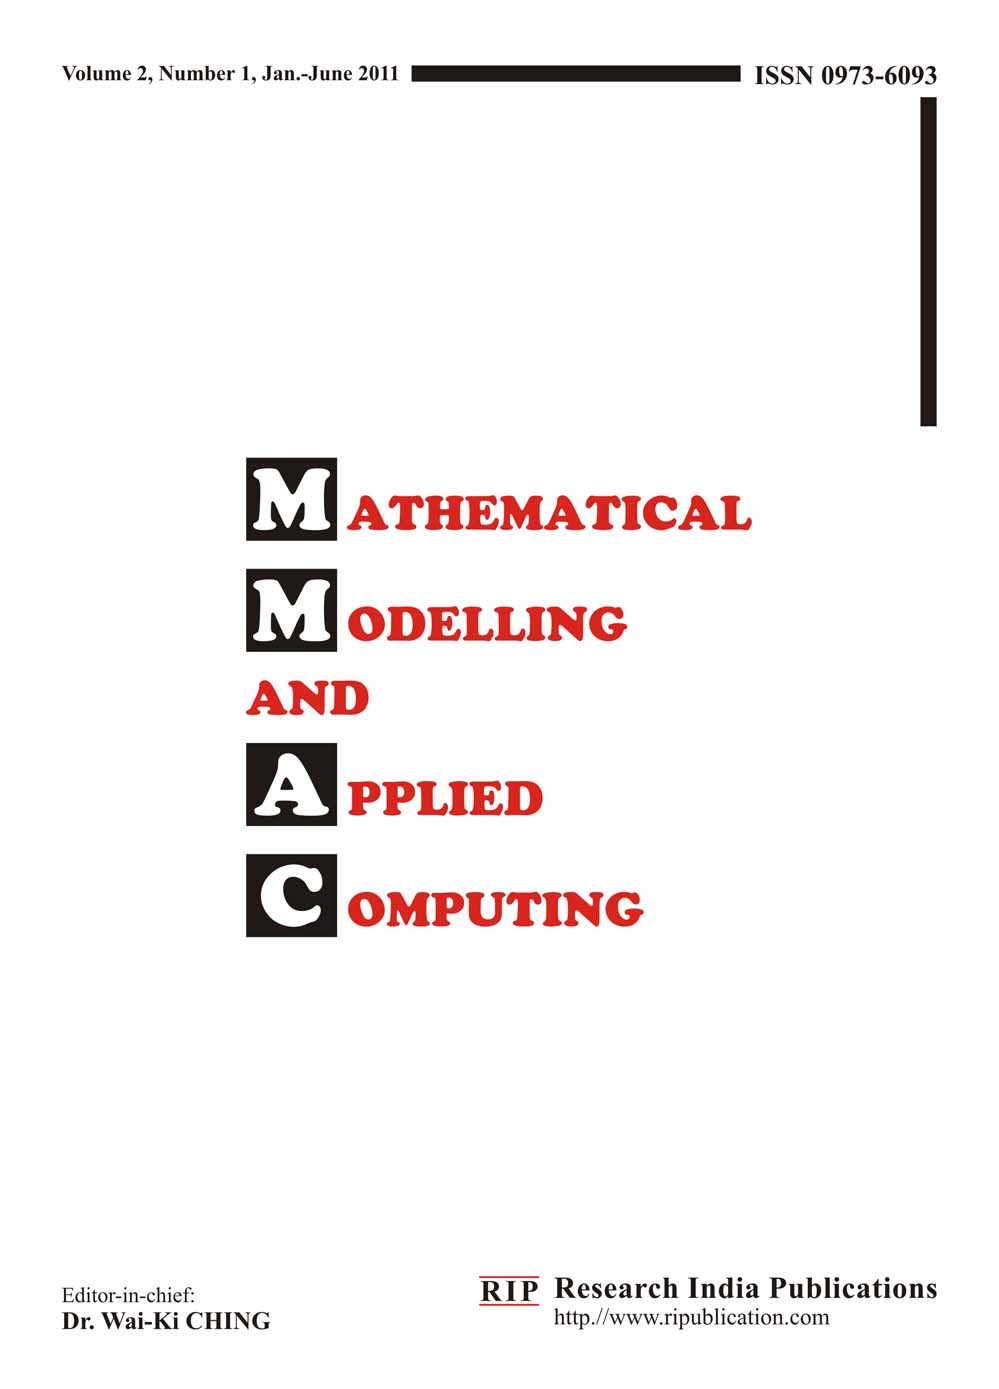 Mathematical Modelling and Applied Computing